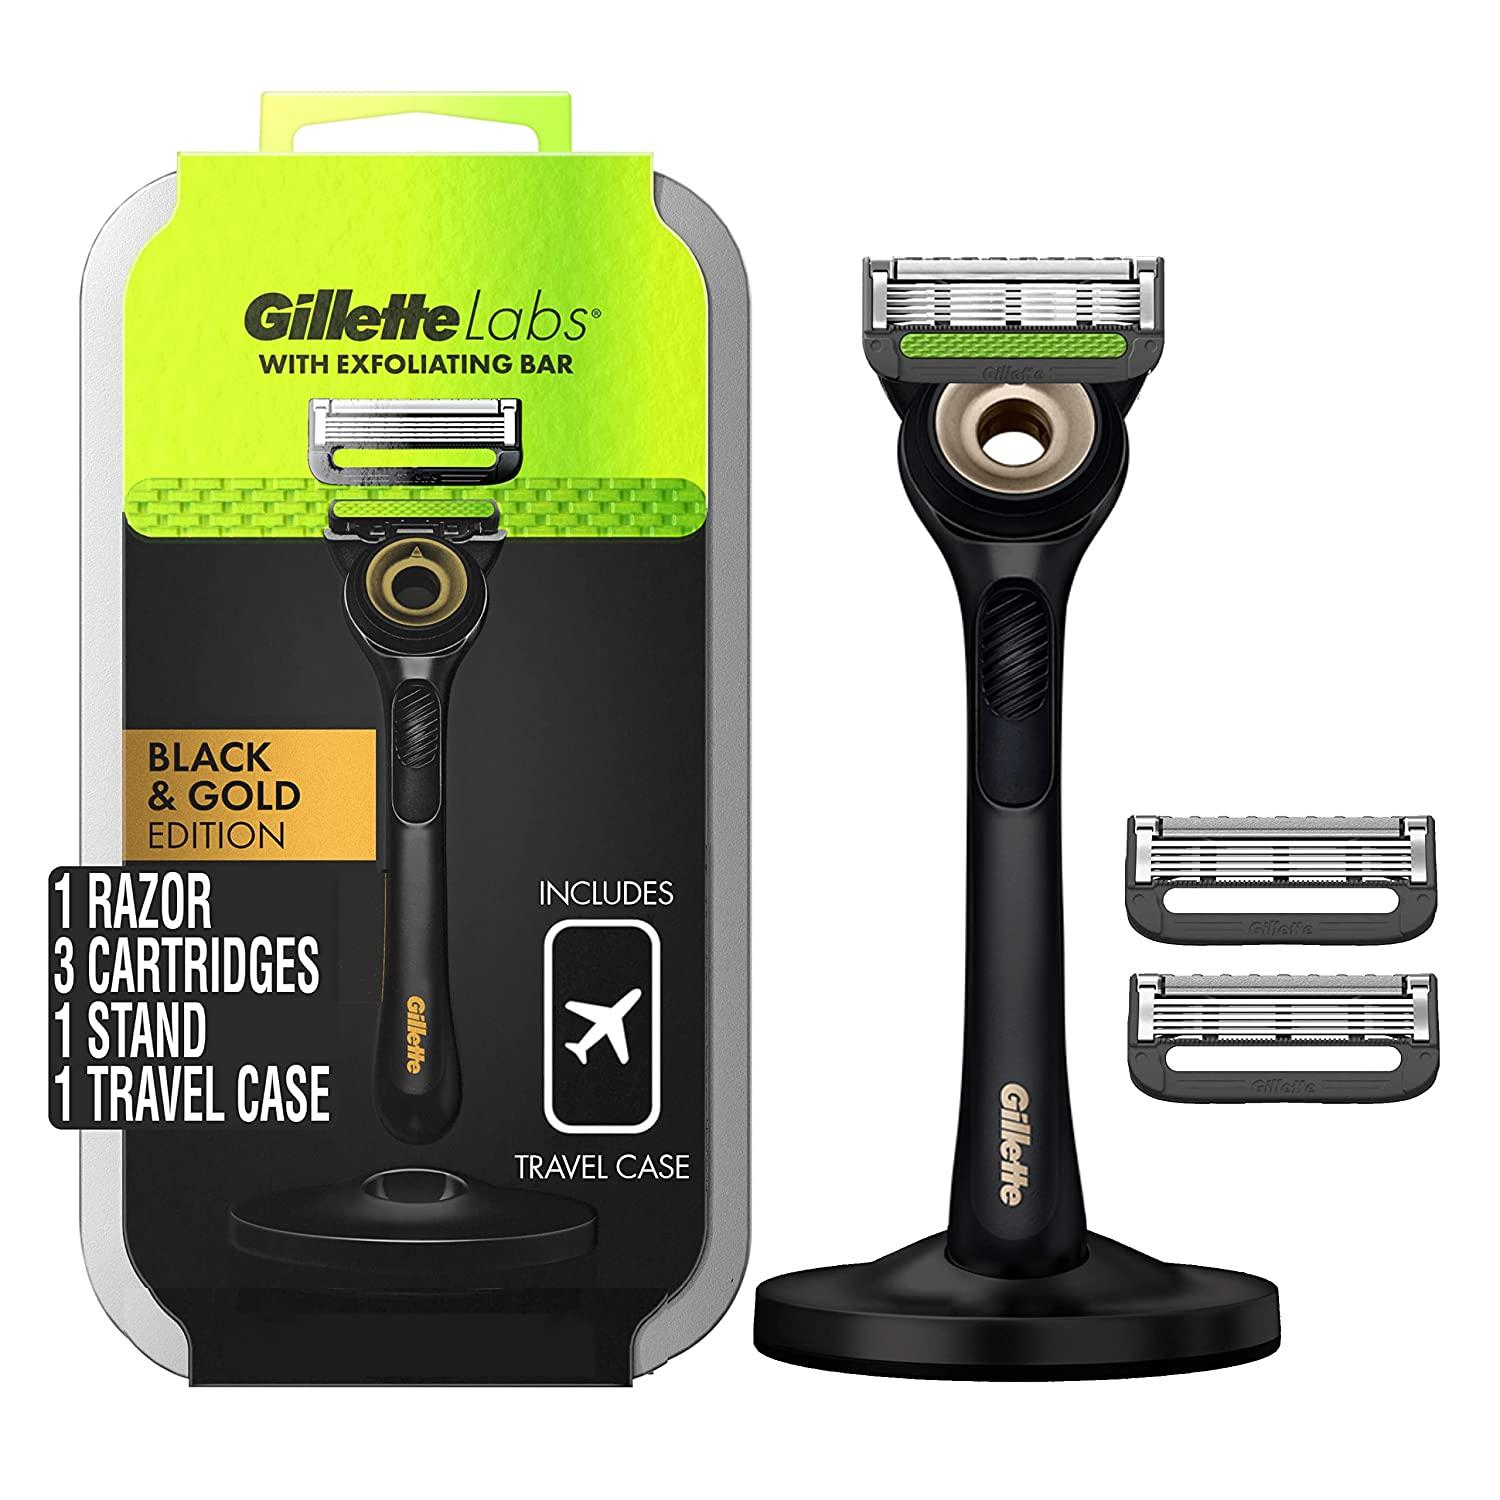 Gillette Razor for Men with Exfoliating Bar Gold Edition for $14.97 Shipped